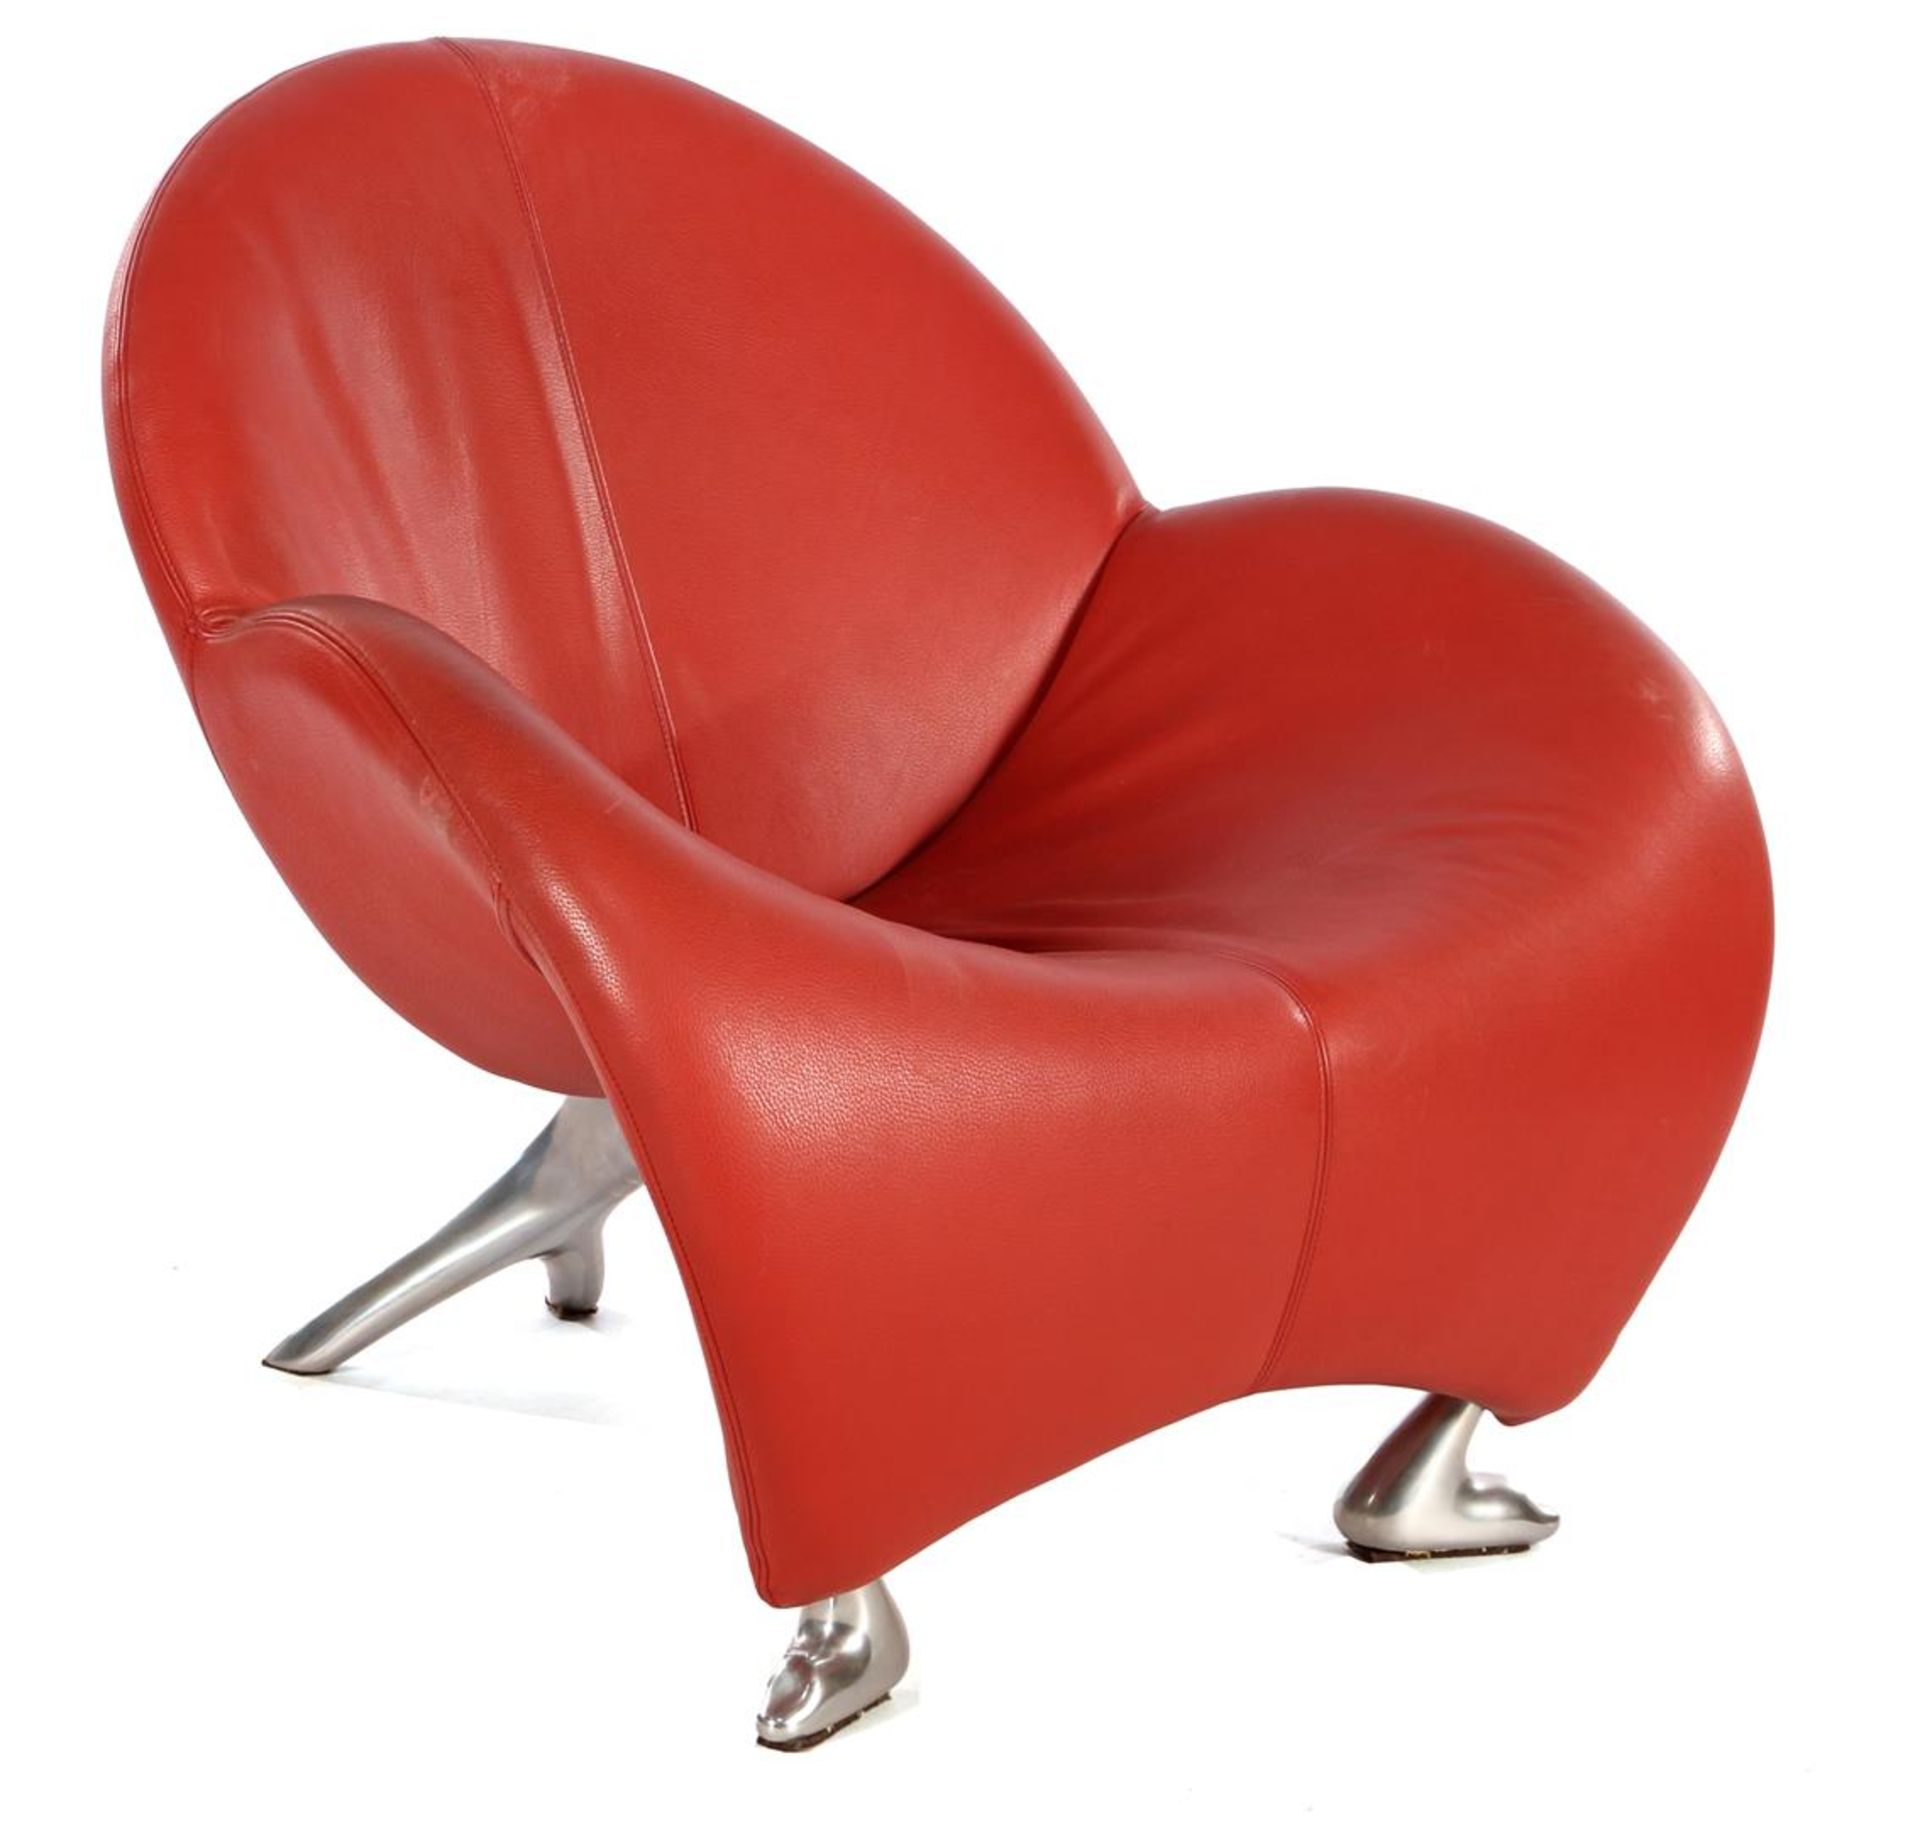 Jan Armgardt (1947-) Organic red leather bucket seat